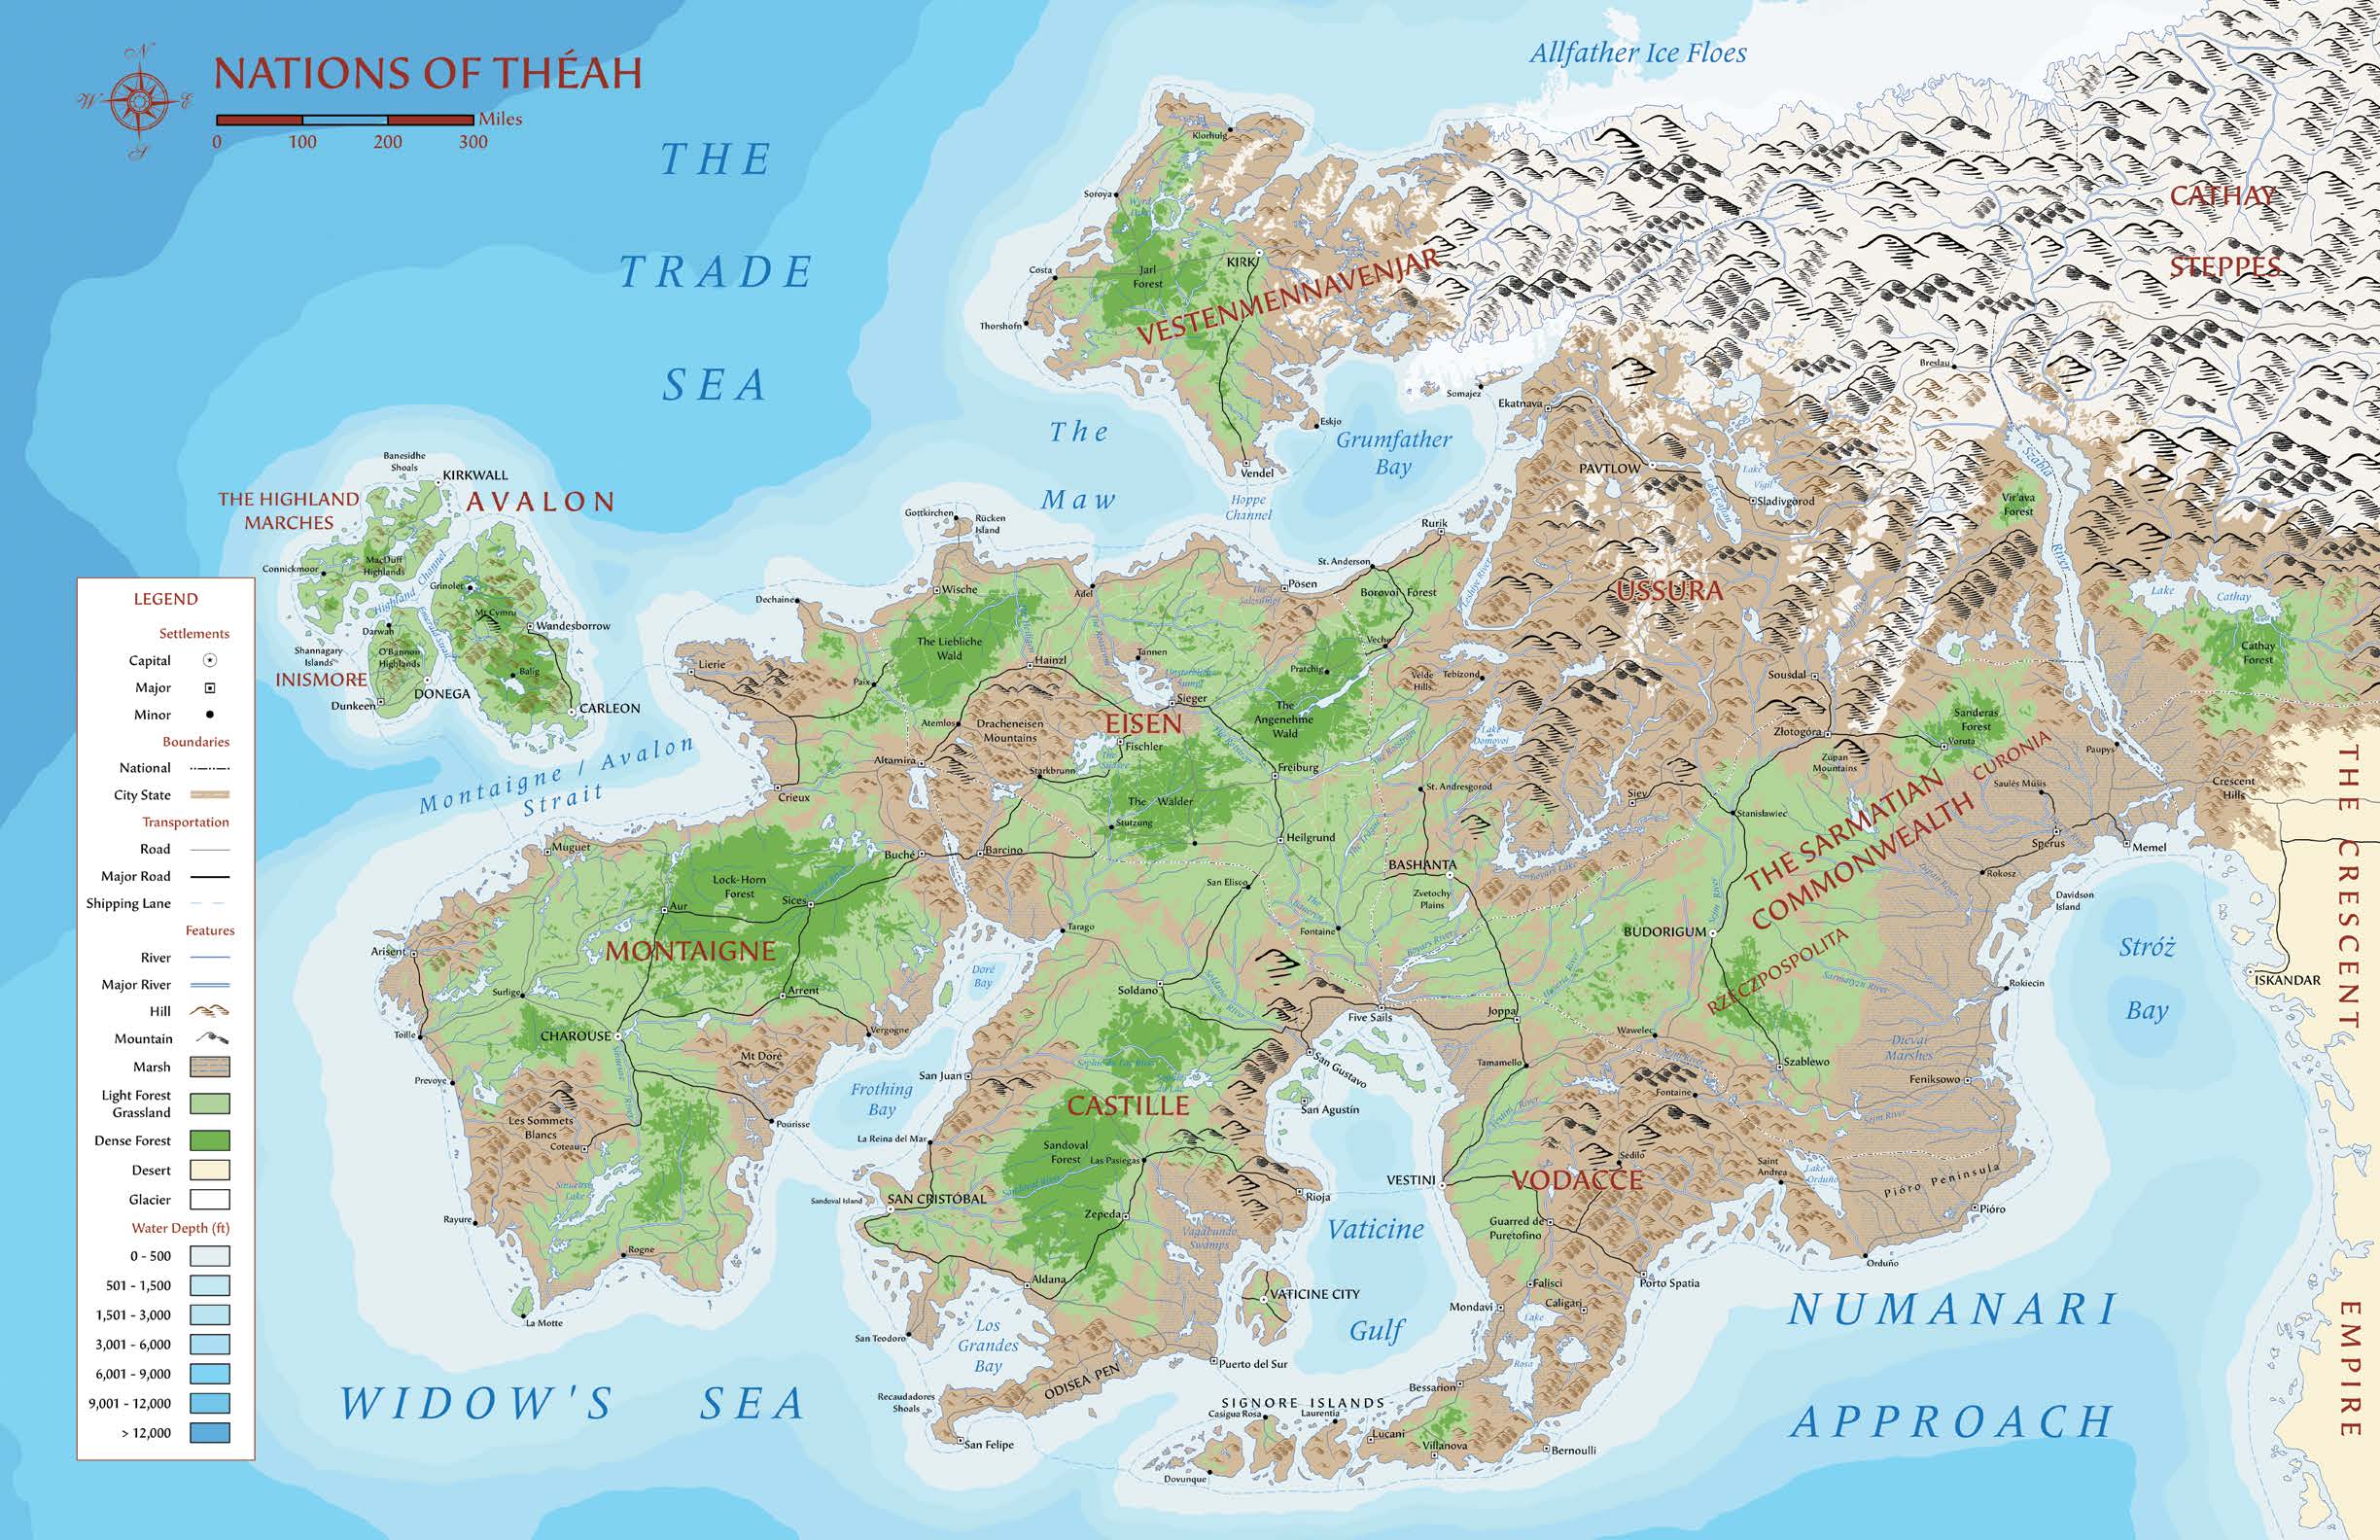 7thsea_map_of_theah_color_hires.jpg